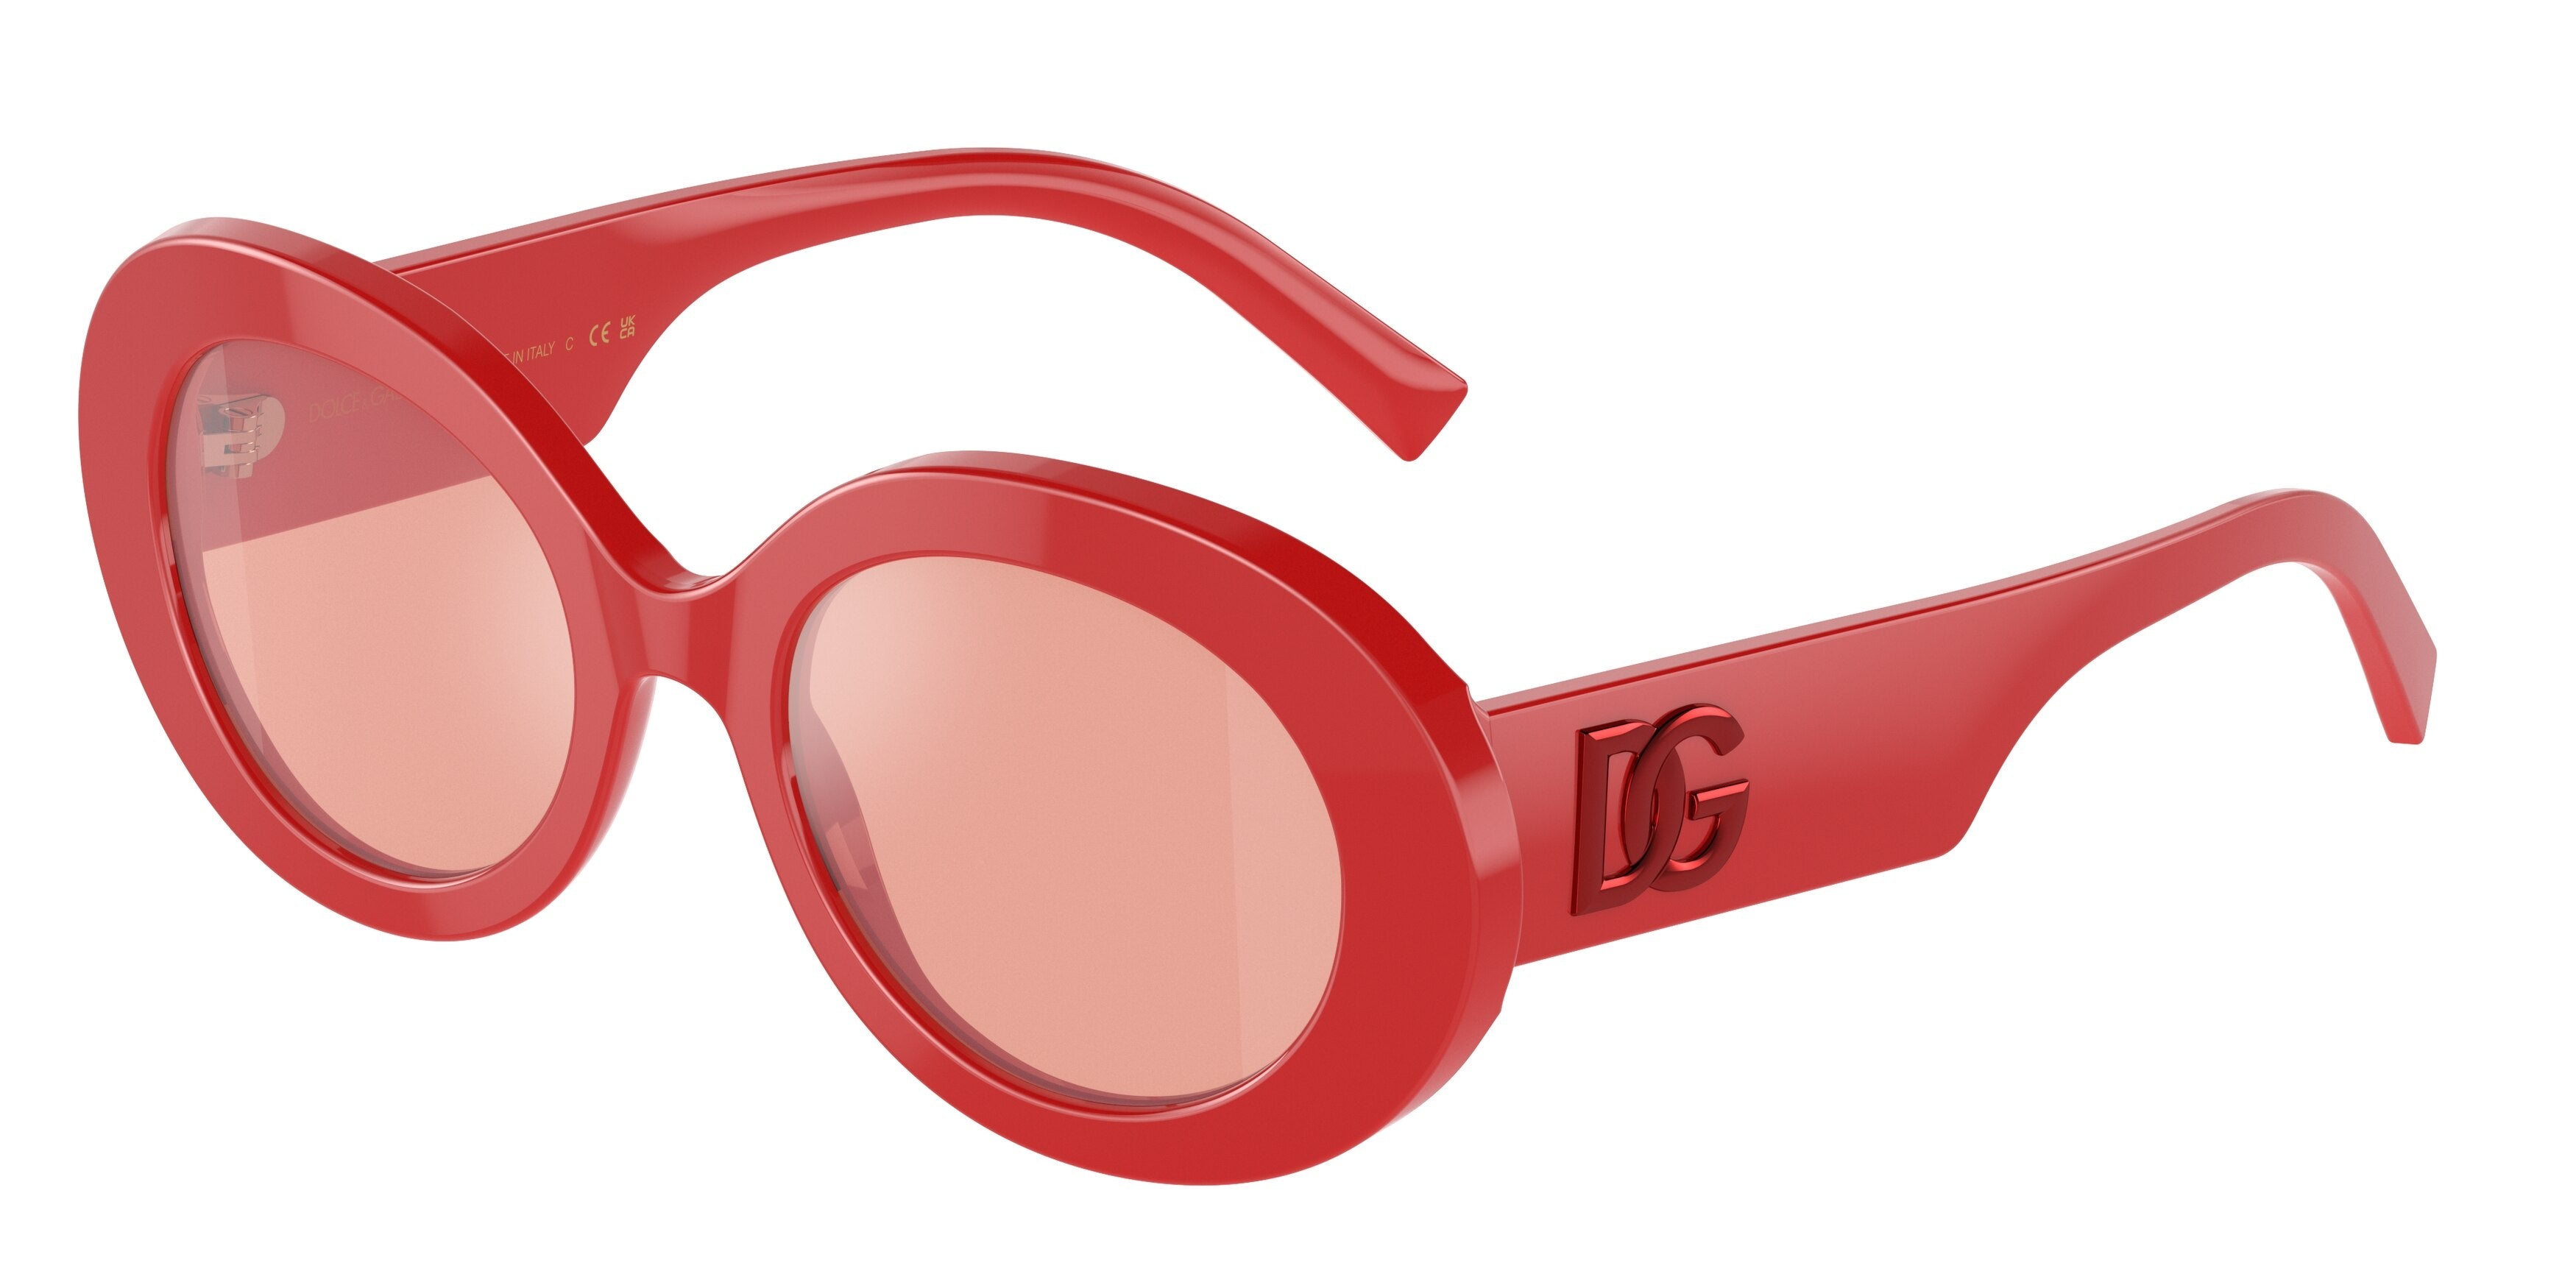 DOLCE & GABBANA DG4448F Oval Sunglasses  3088E4-Red 51-145-20 - Color Map Red